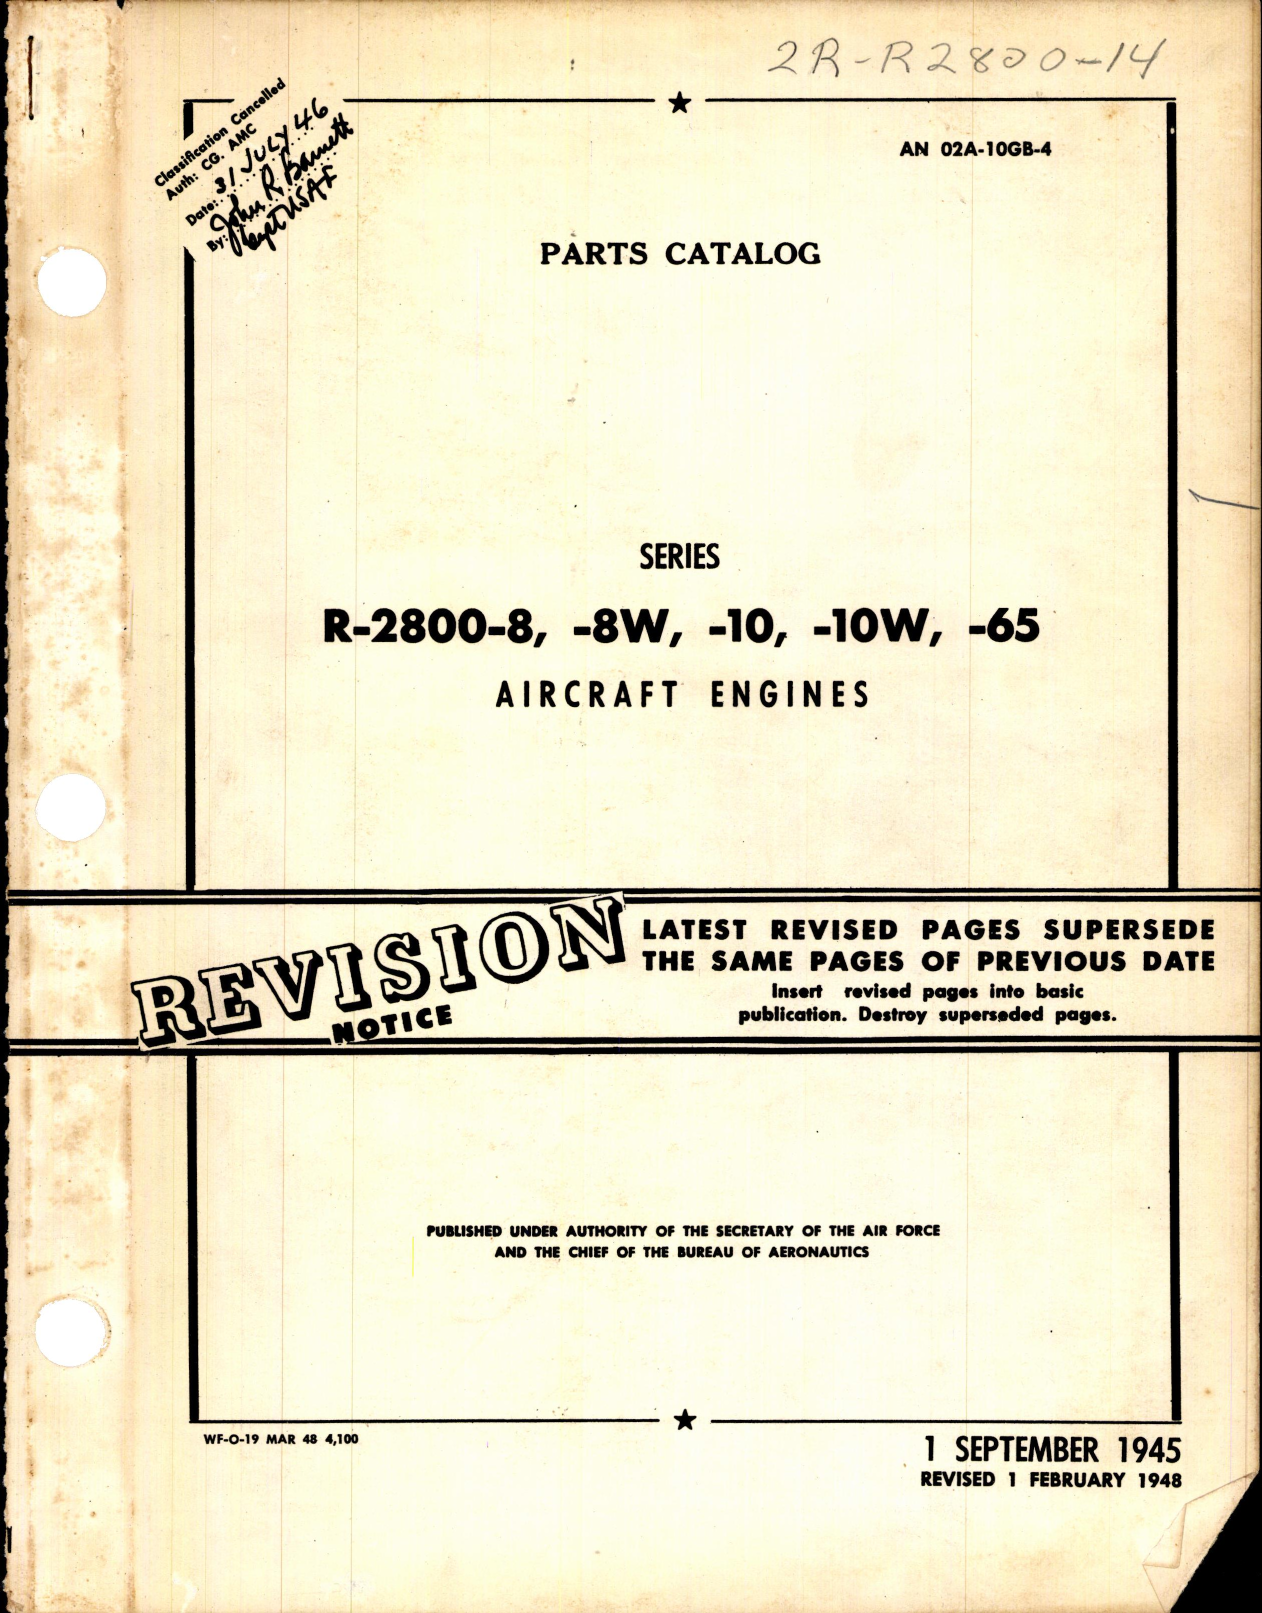 Sample page 1 from AirCorps Library document: Parts Catalog for R-2800-8, -8W, -10, -10W, and -65 Engines